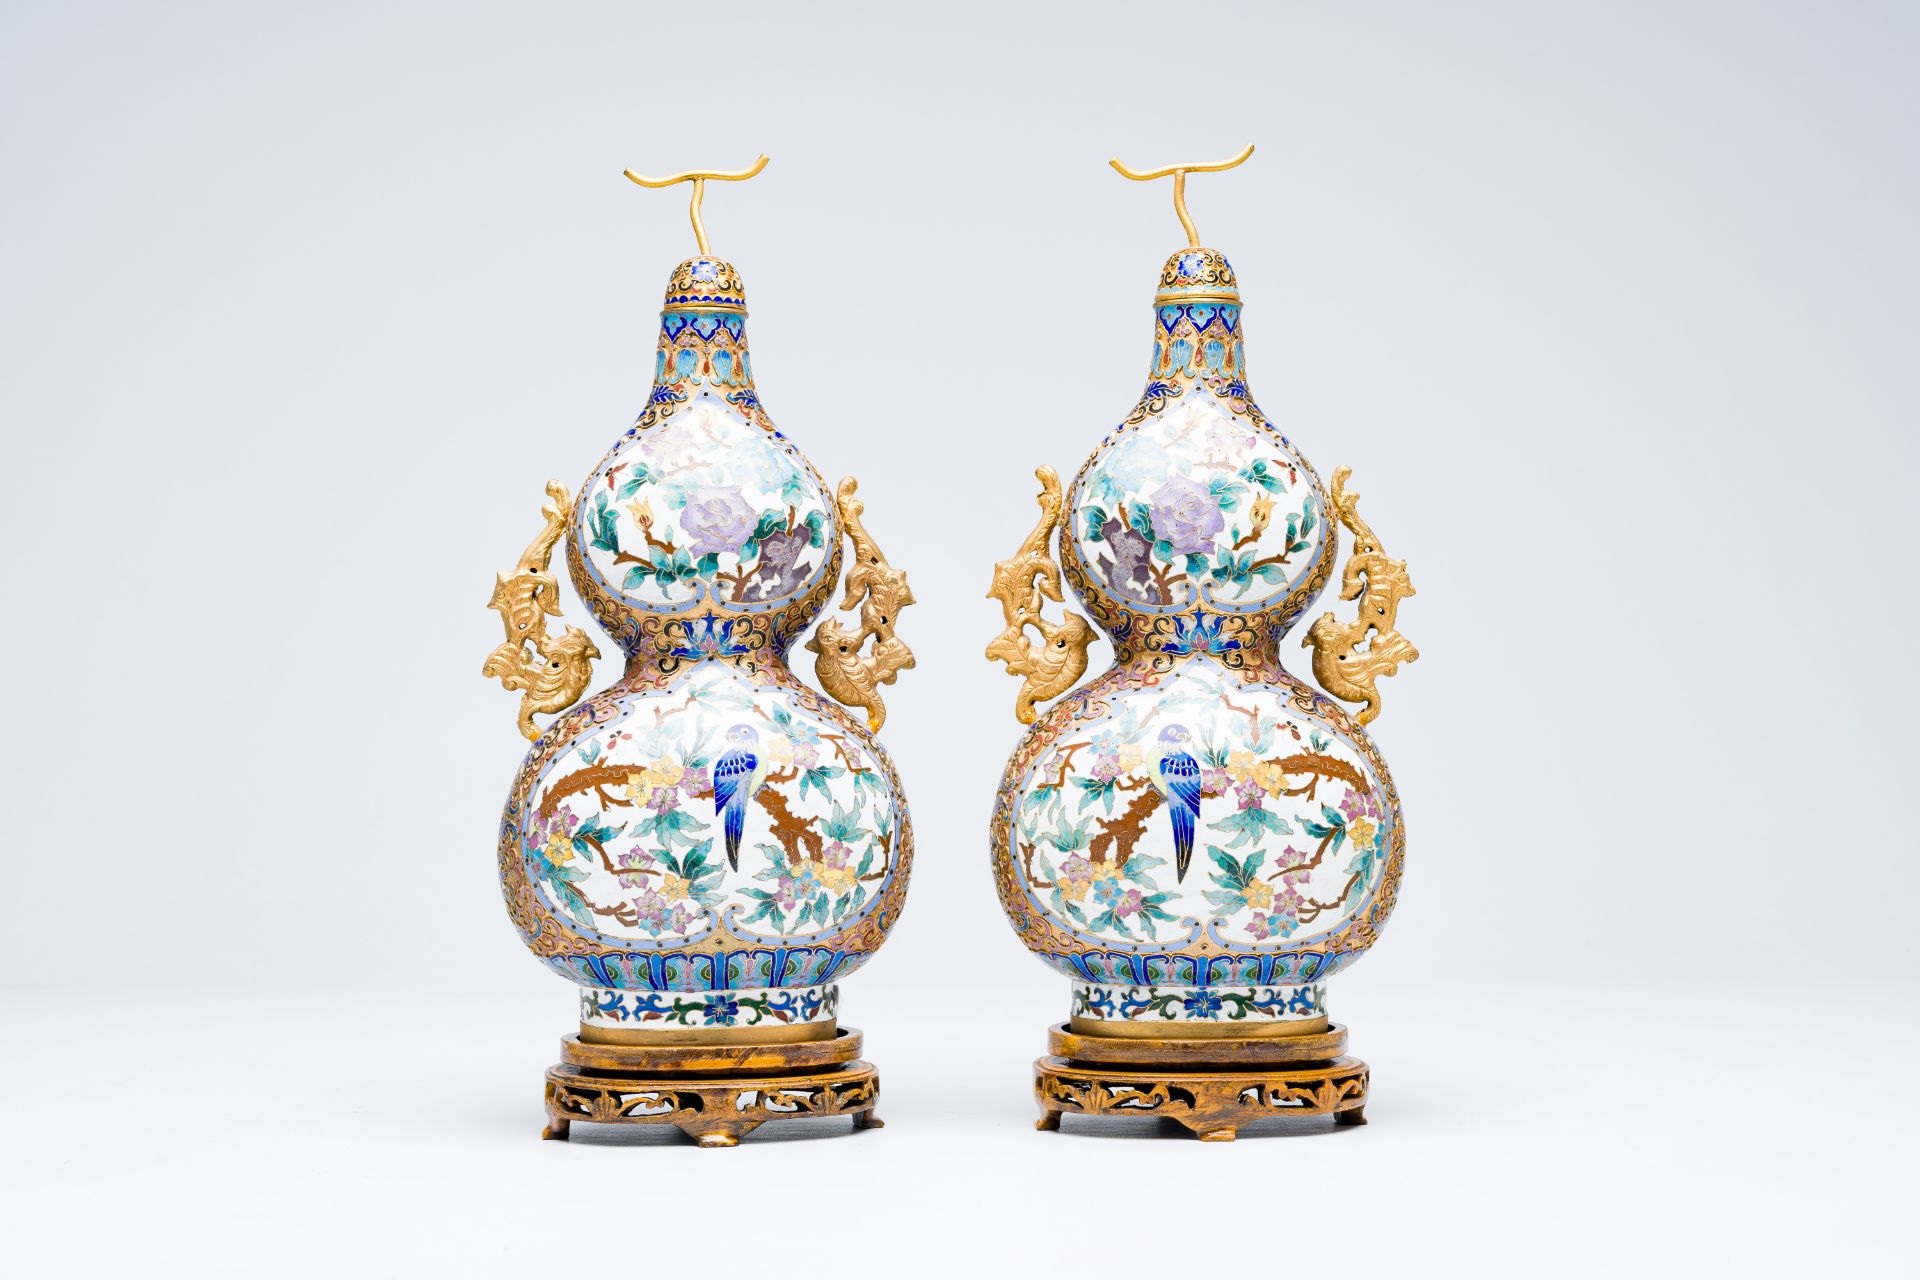 A pair of Chinese cloisonne double gourd vases on wooden stands, 20th C.